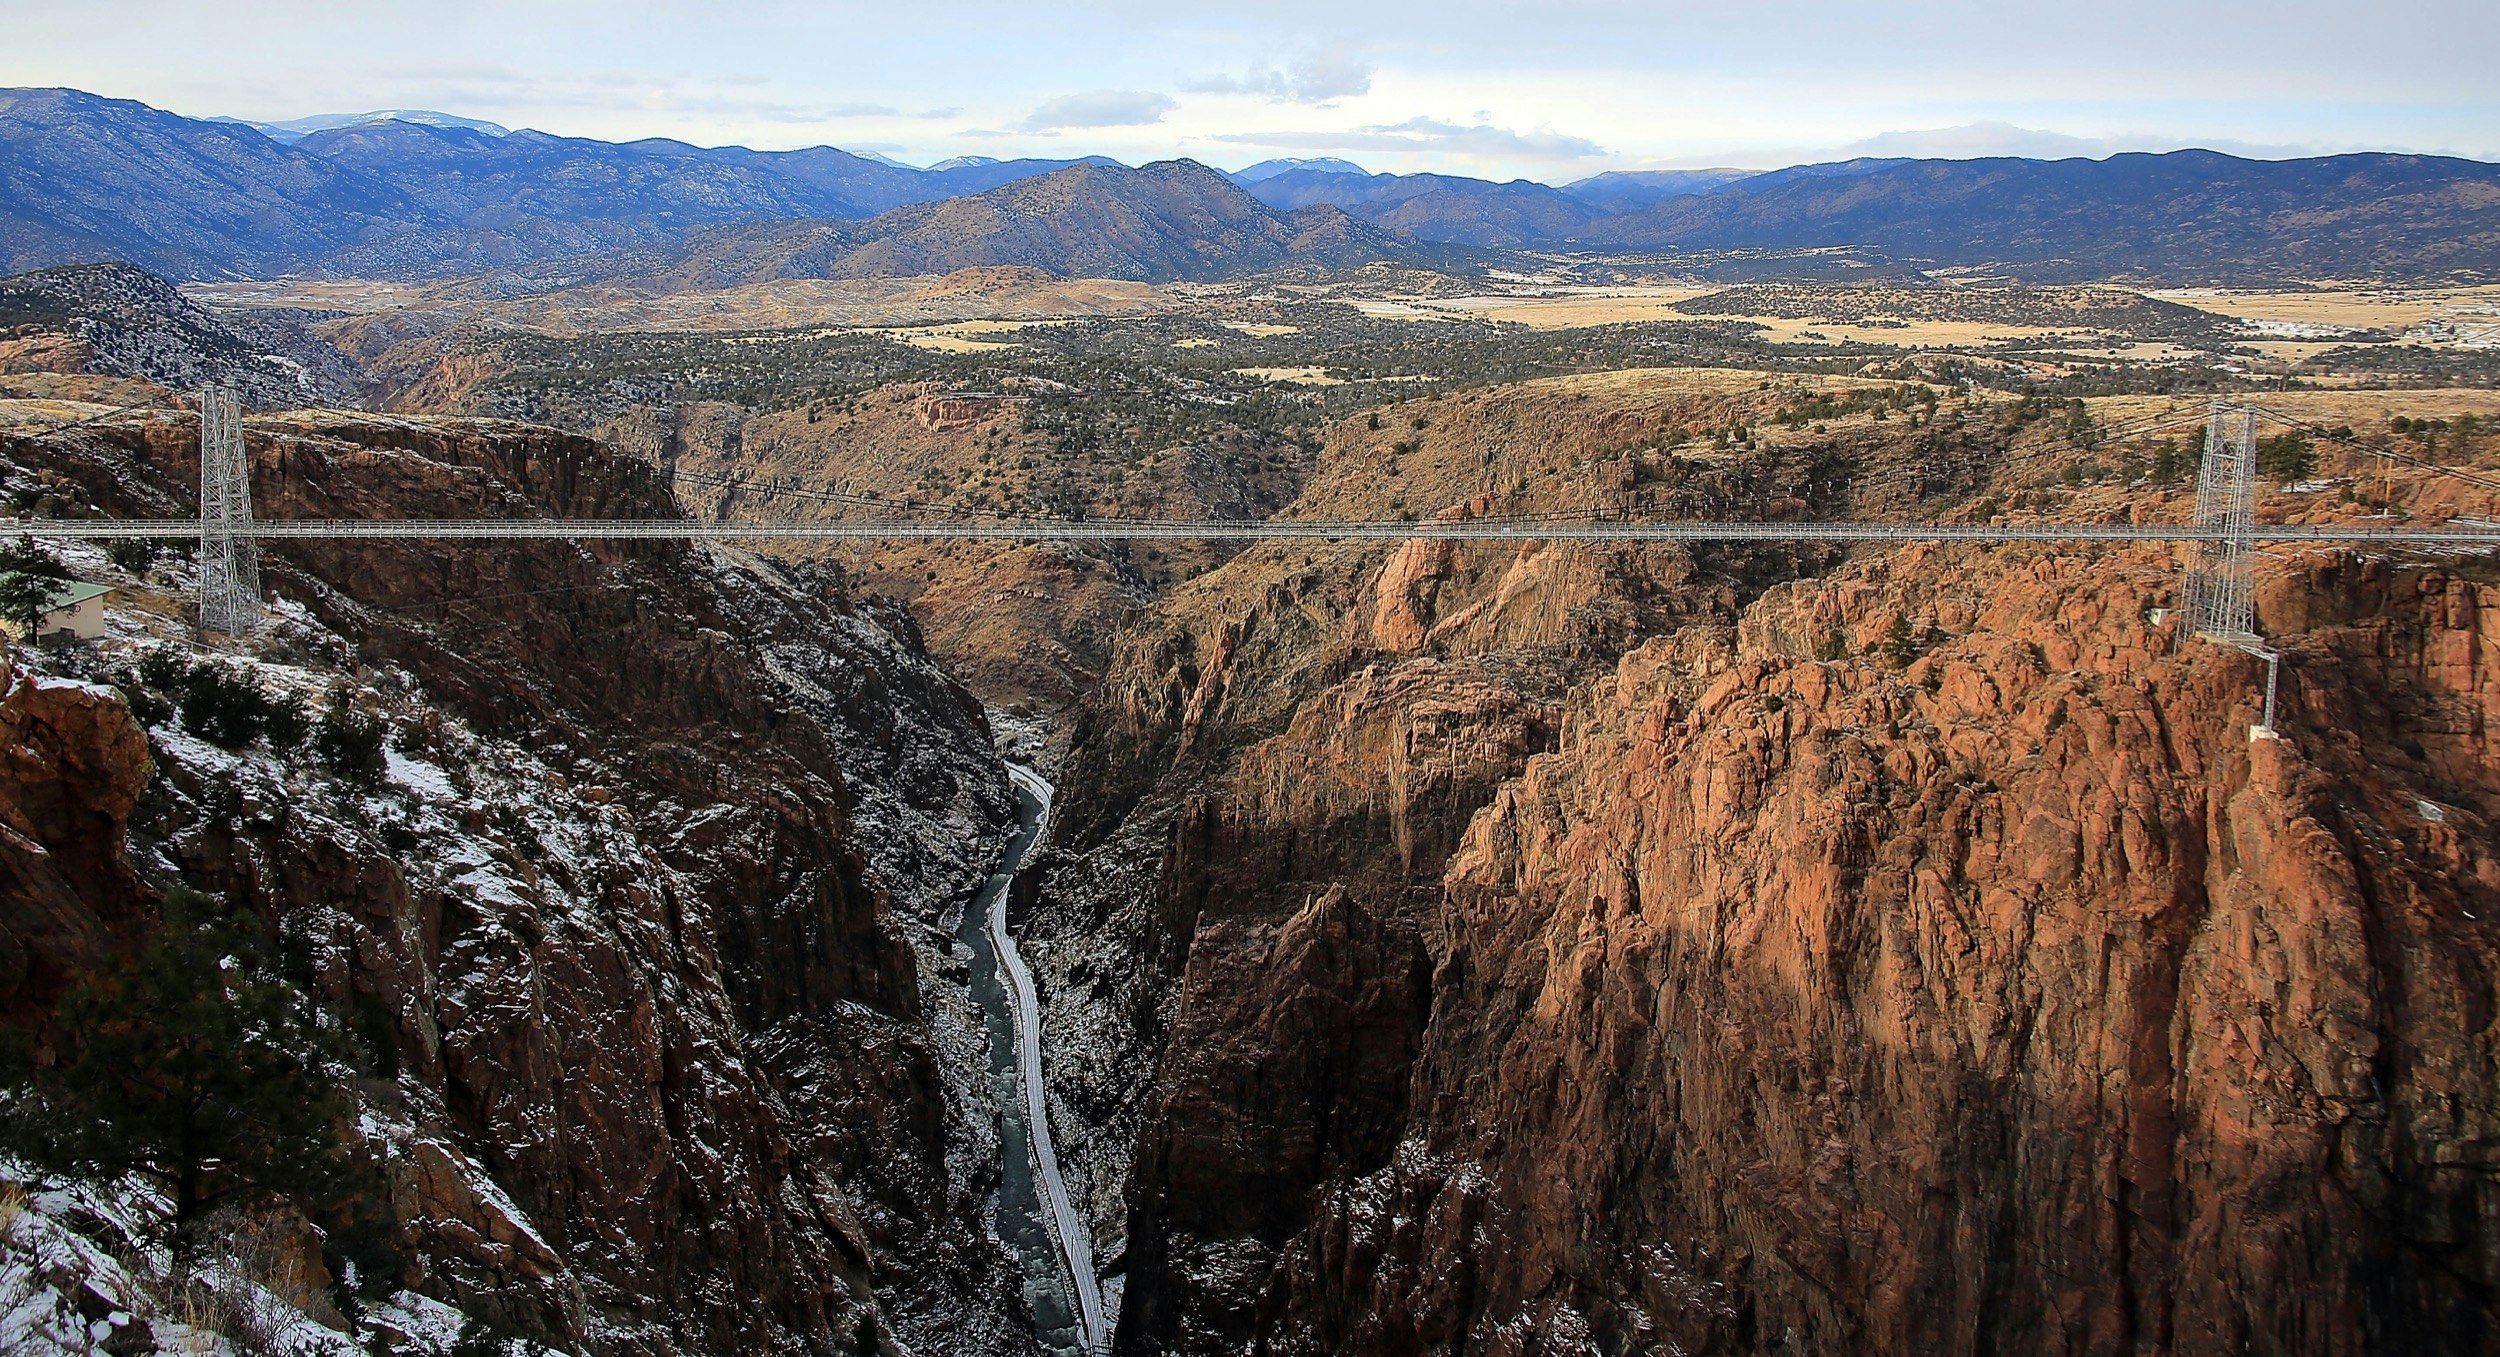 A suspension bridge stretches across a gorge thousands of feet deep in Colorado